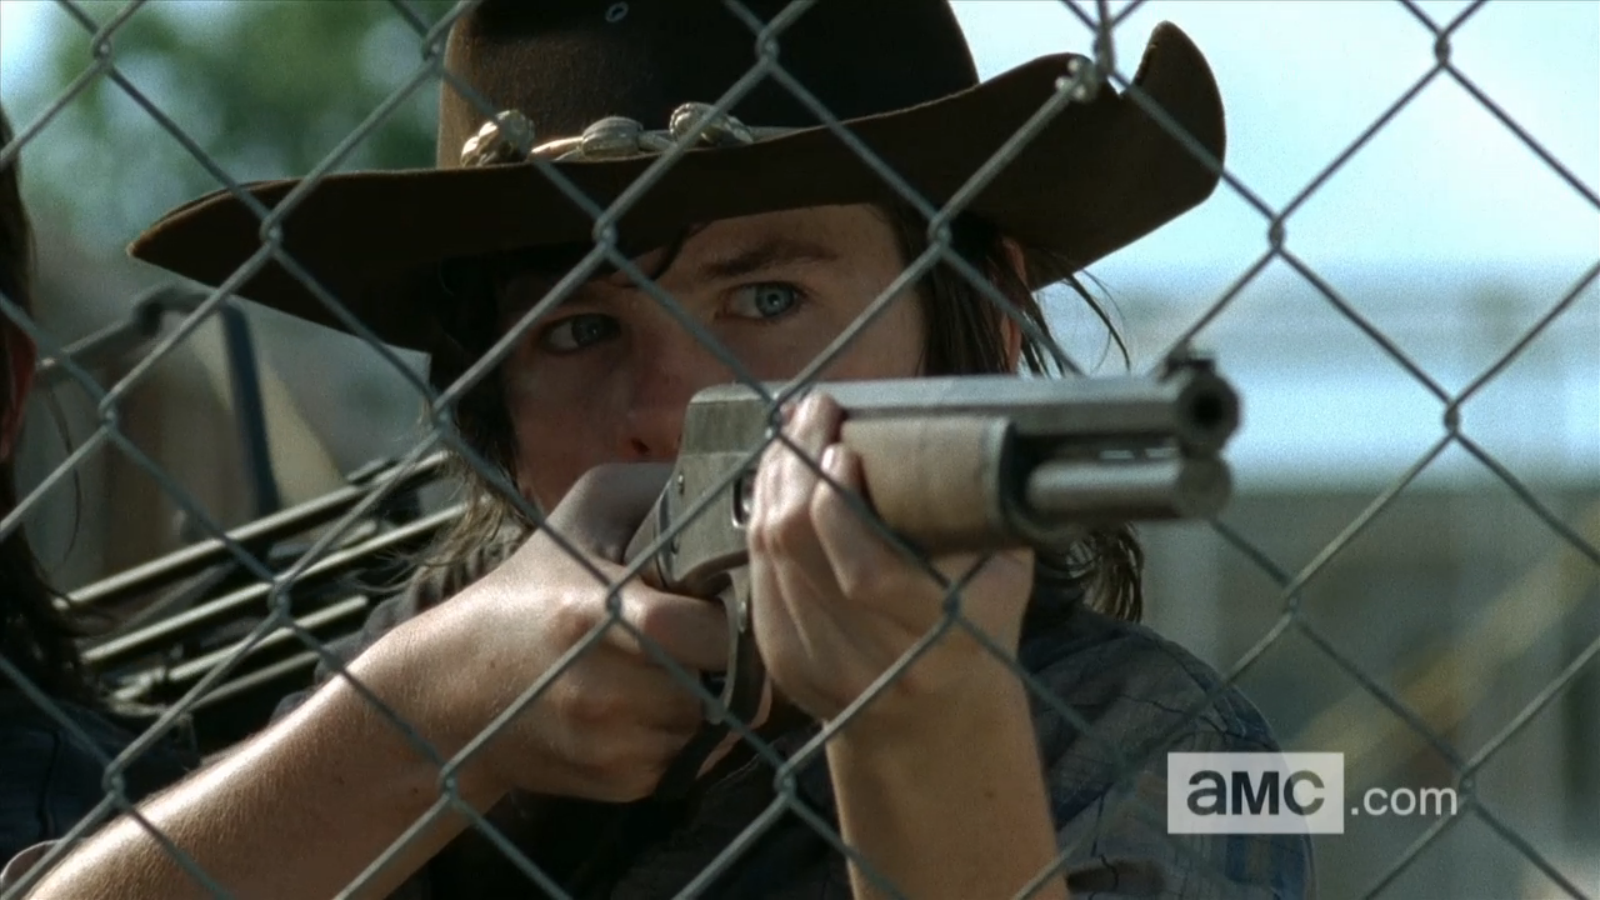 http://img1.wikia.nocookie.net/__cb20131202060903/walkingdead/images/9/9a/TFG_Carl_Death_Eyes.png